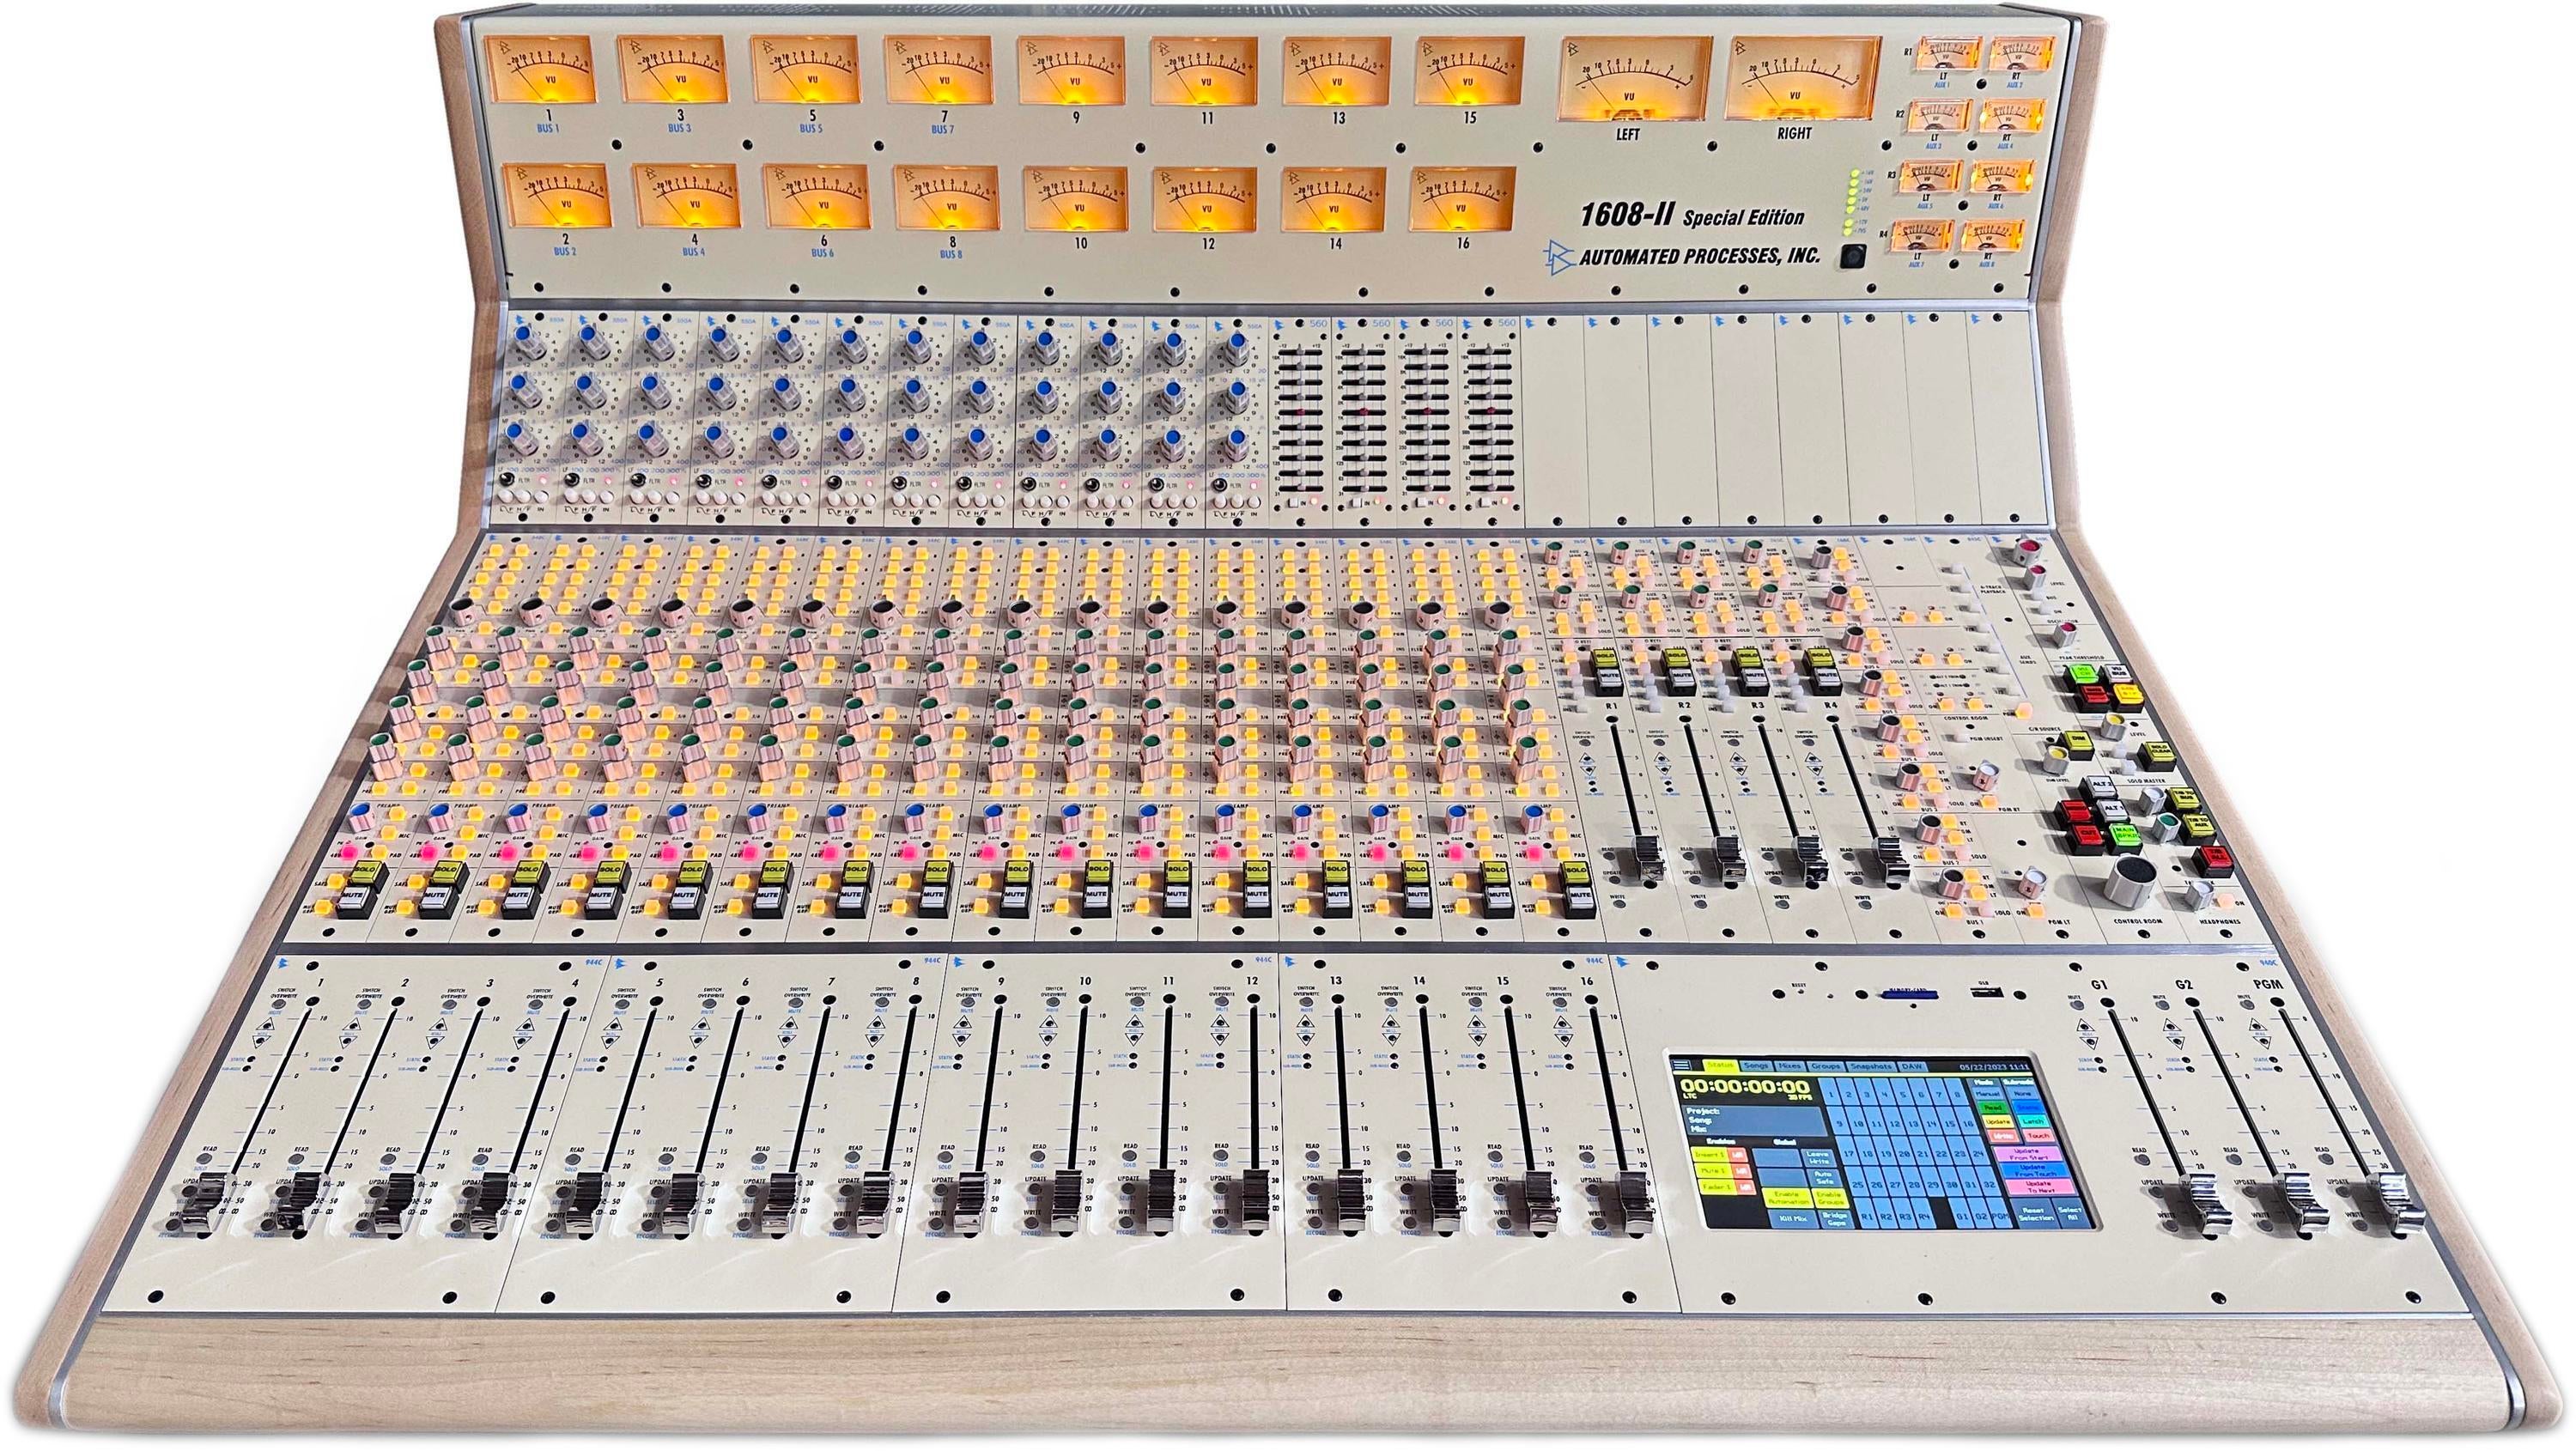 Audient ASP8024-HE 24-channel Recording Console with DLC and 